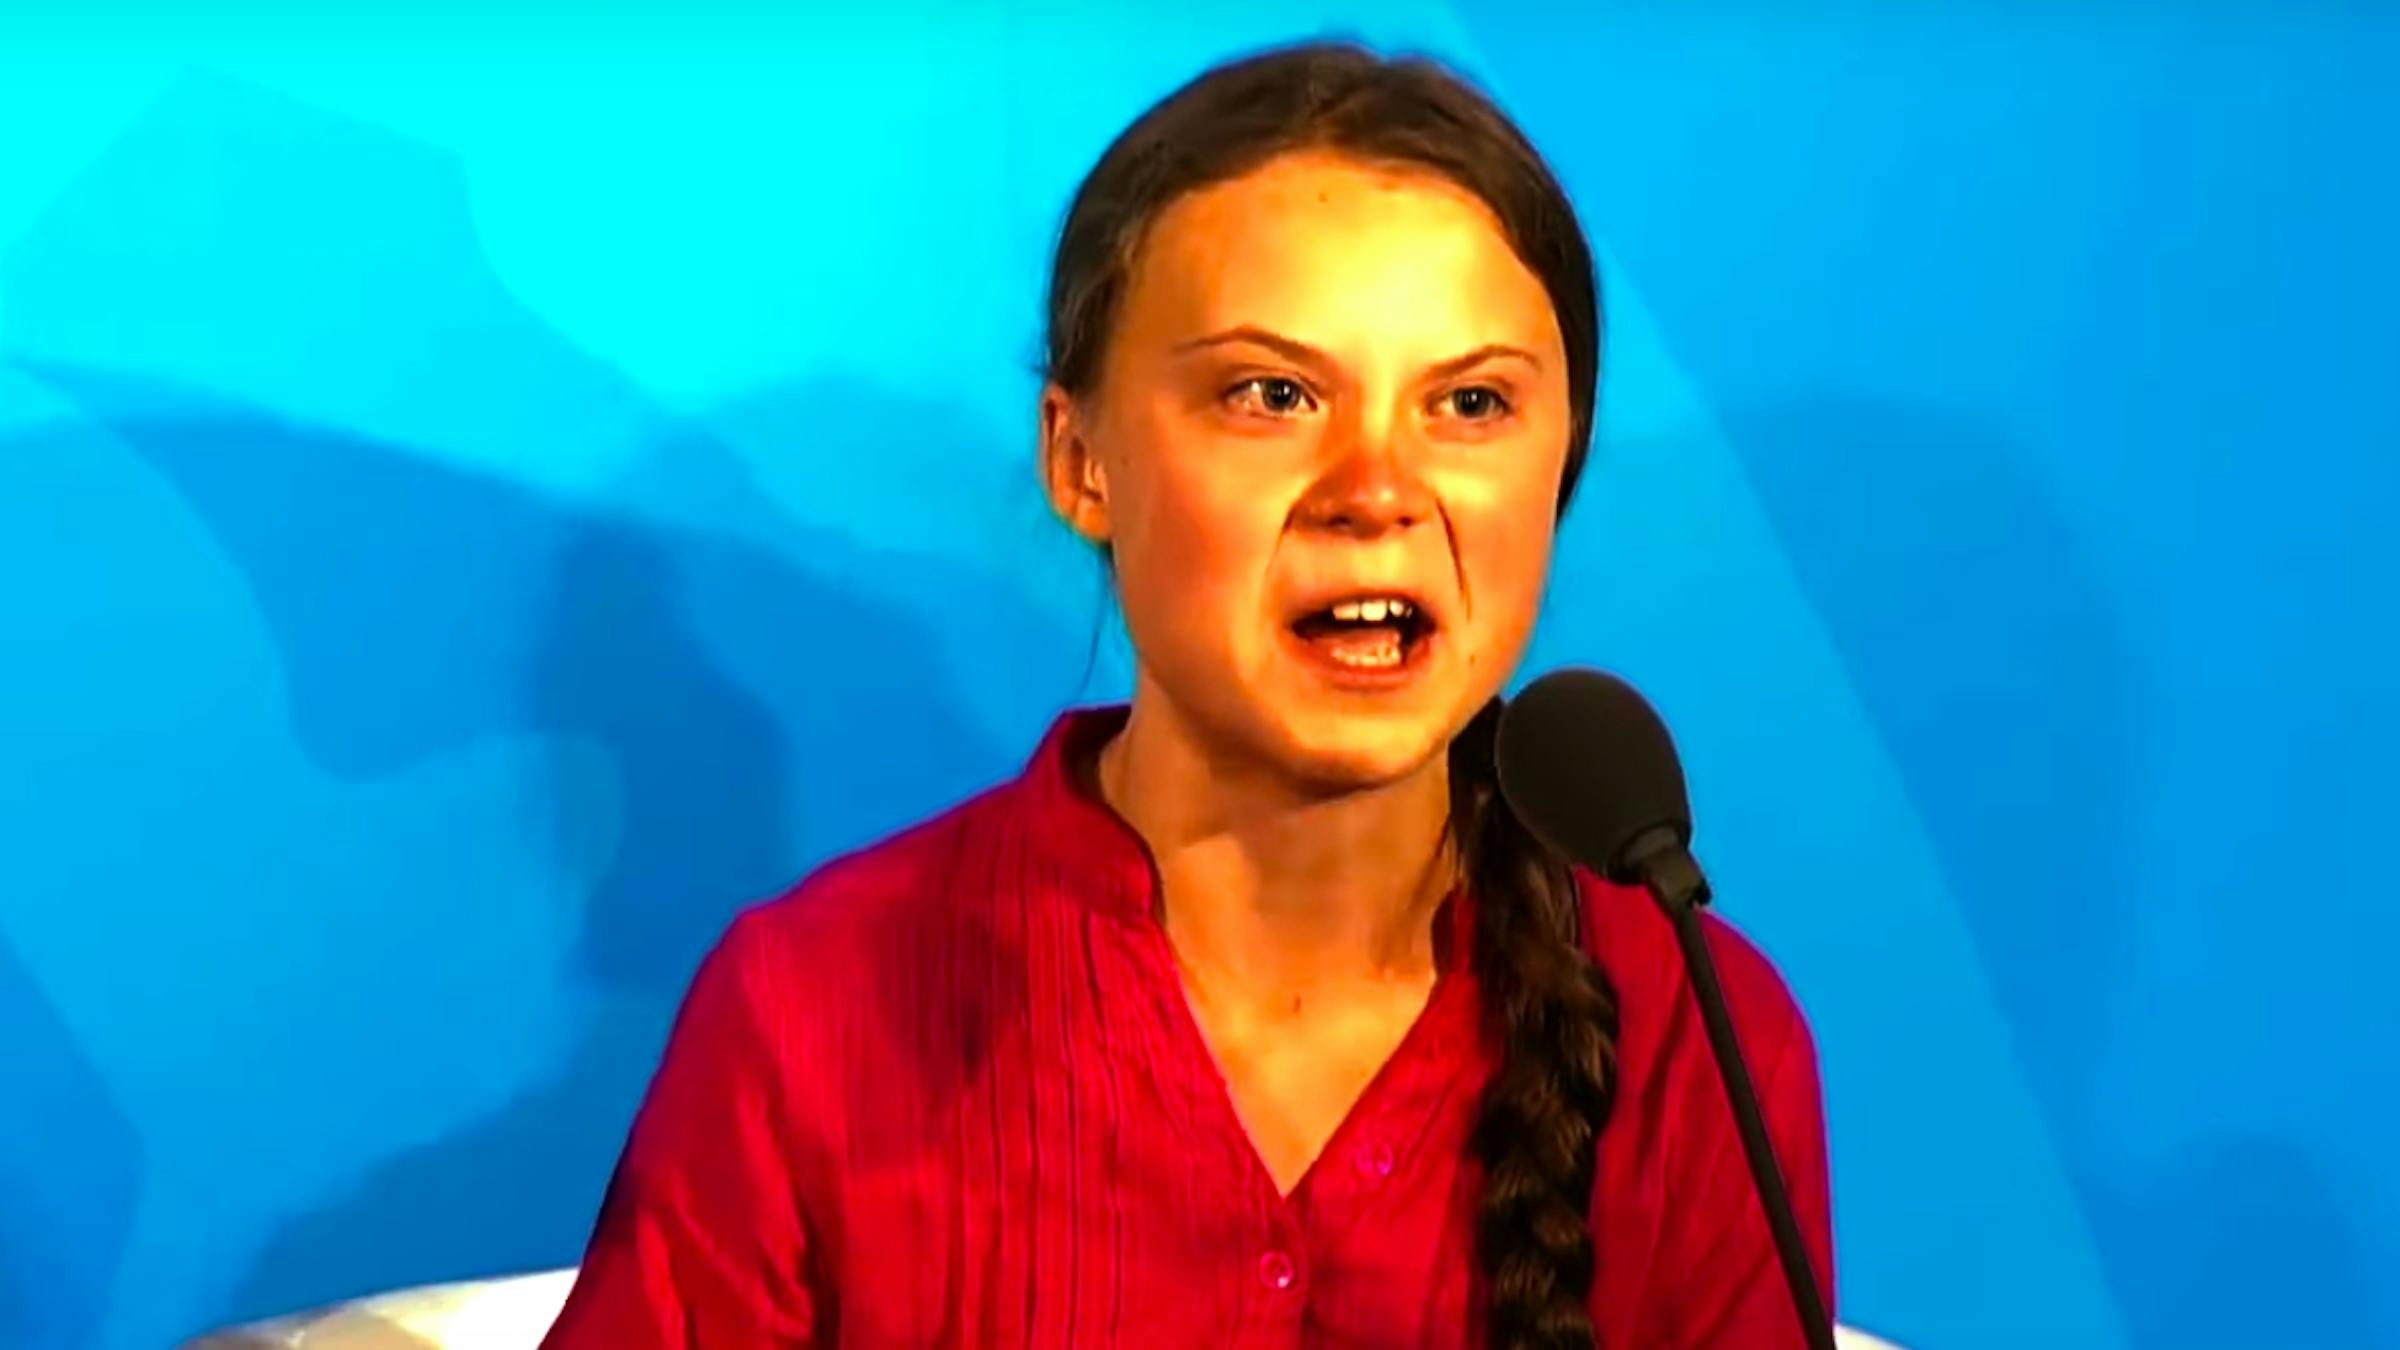 Greta Thunberg: "From Now On, I Will Be Doing Death Metal Only!"